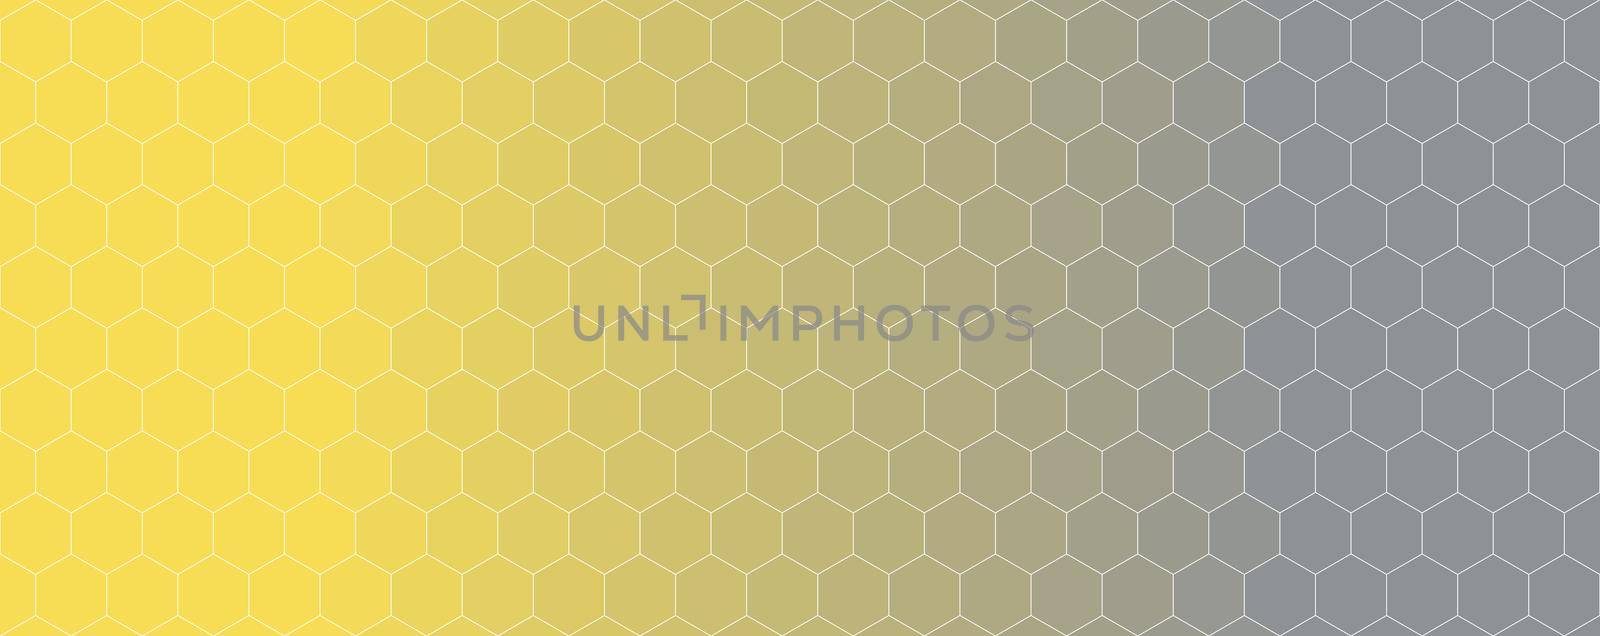 Hexagon pattern with yellow to grey gradient by dutourdumonde